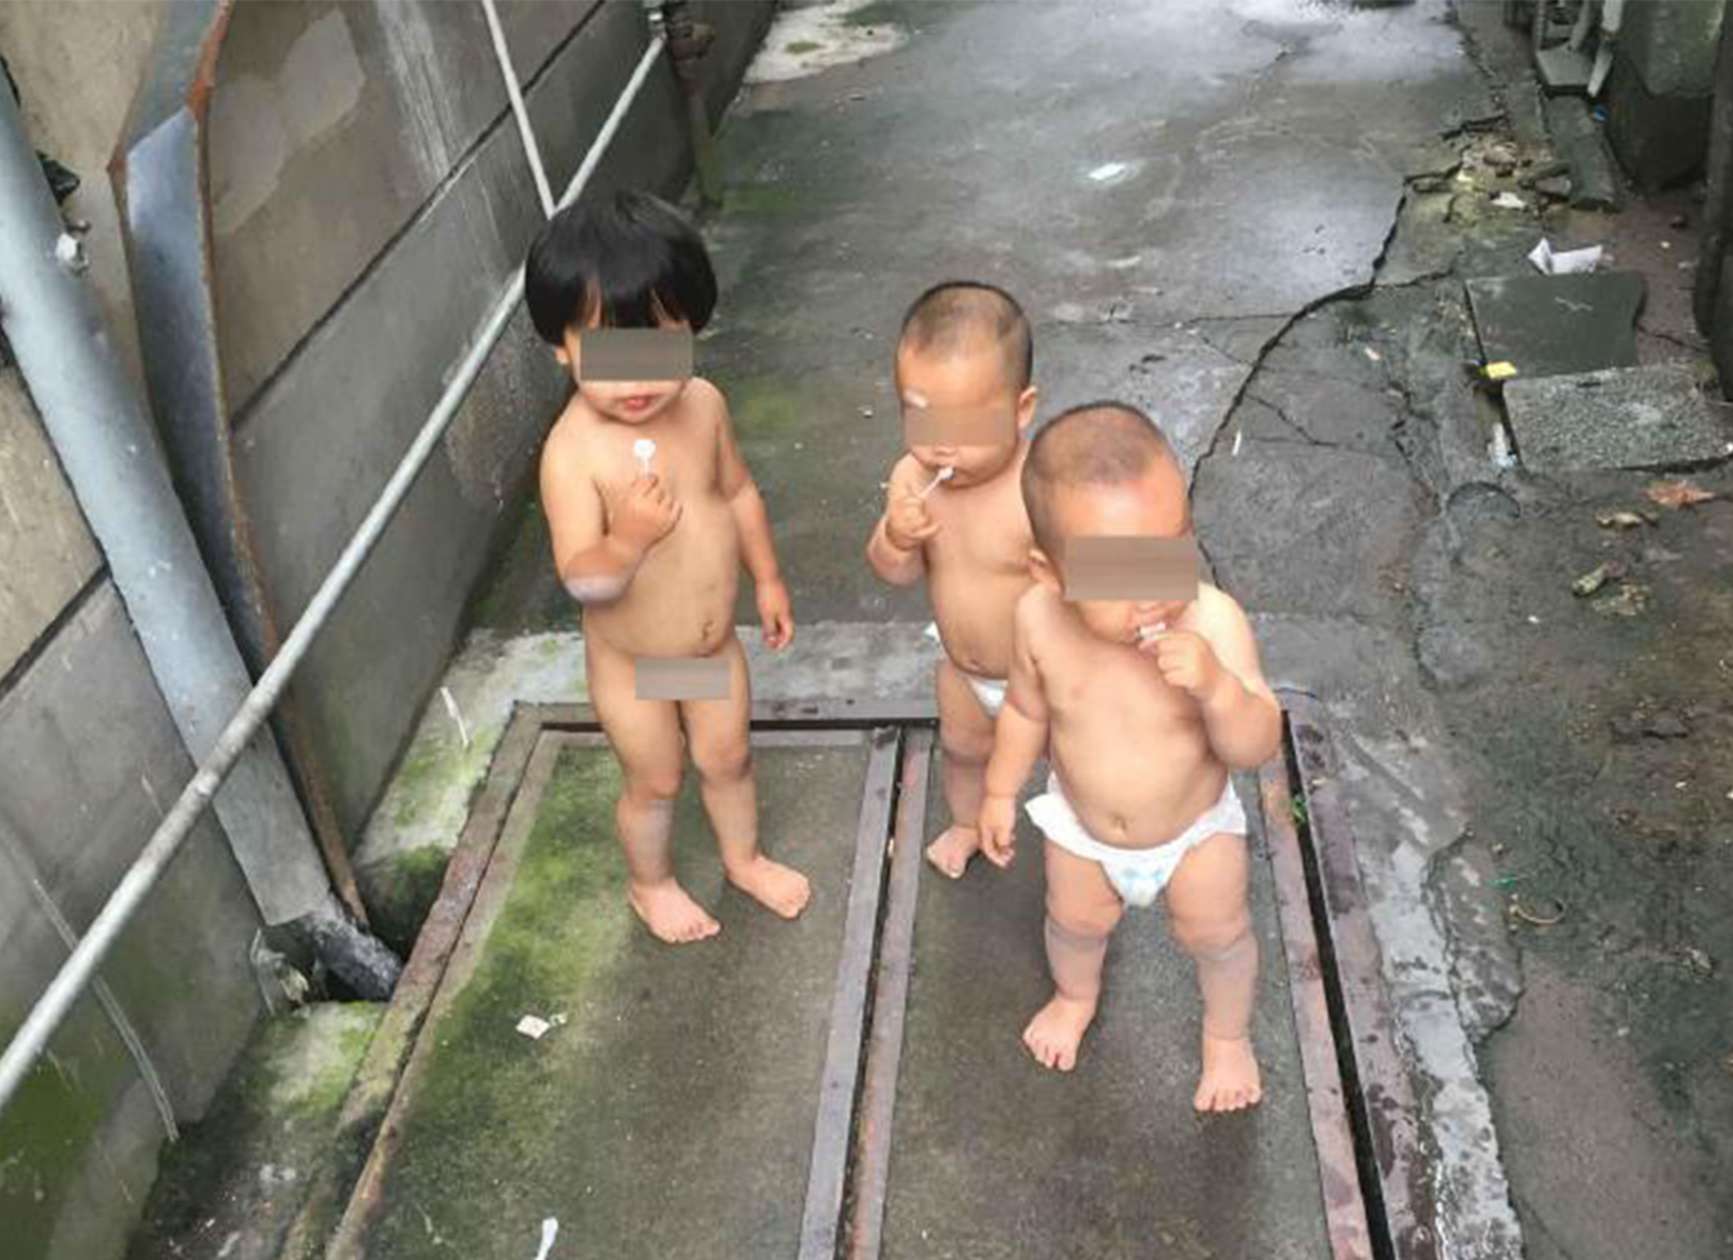 The three children were spotted by police after their ‘great escape’ - only a block from their home. Photo: SCMP Pictures